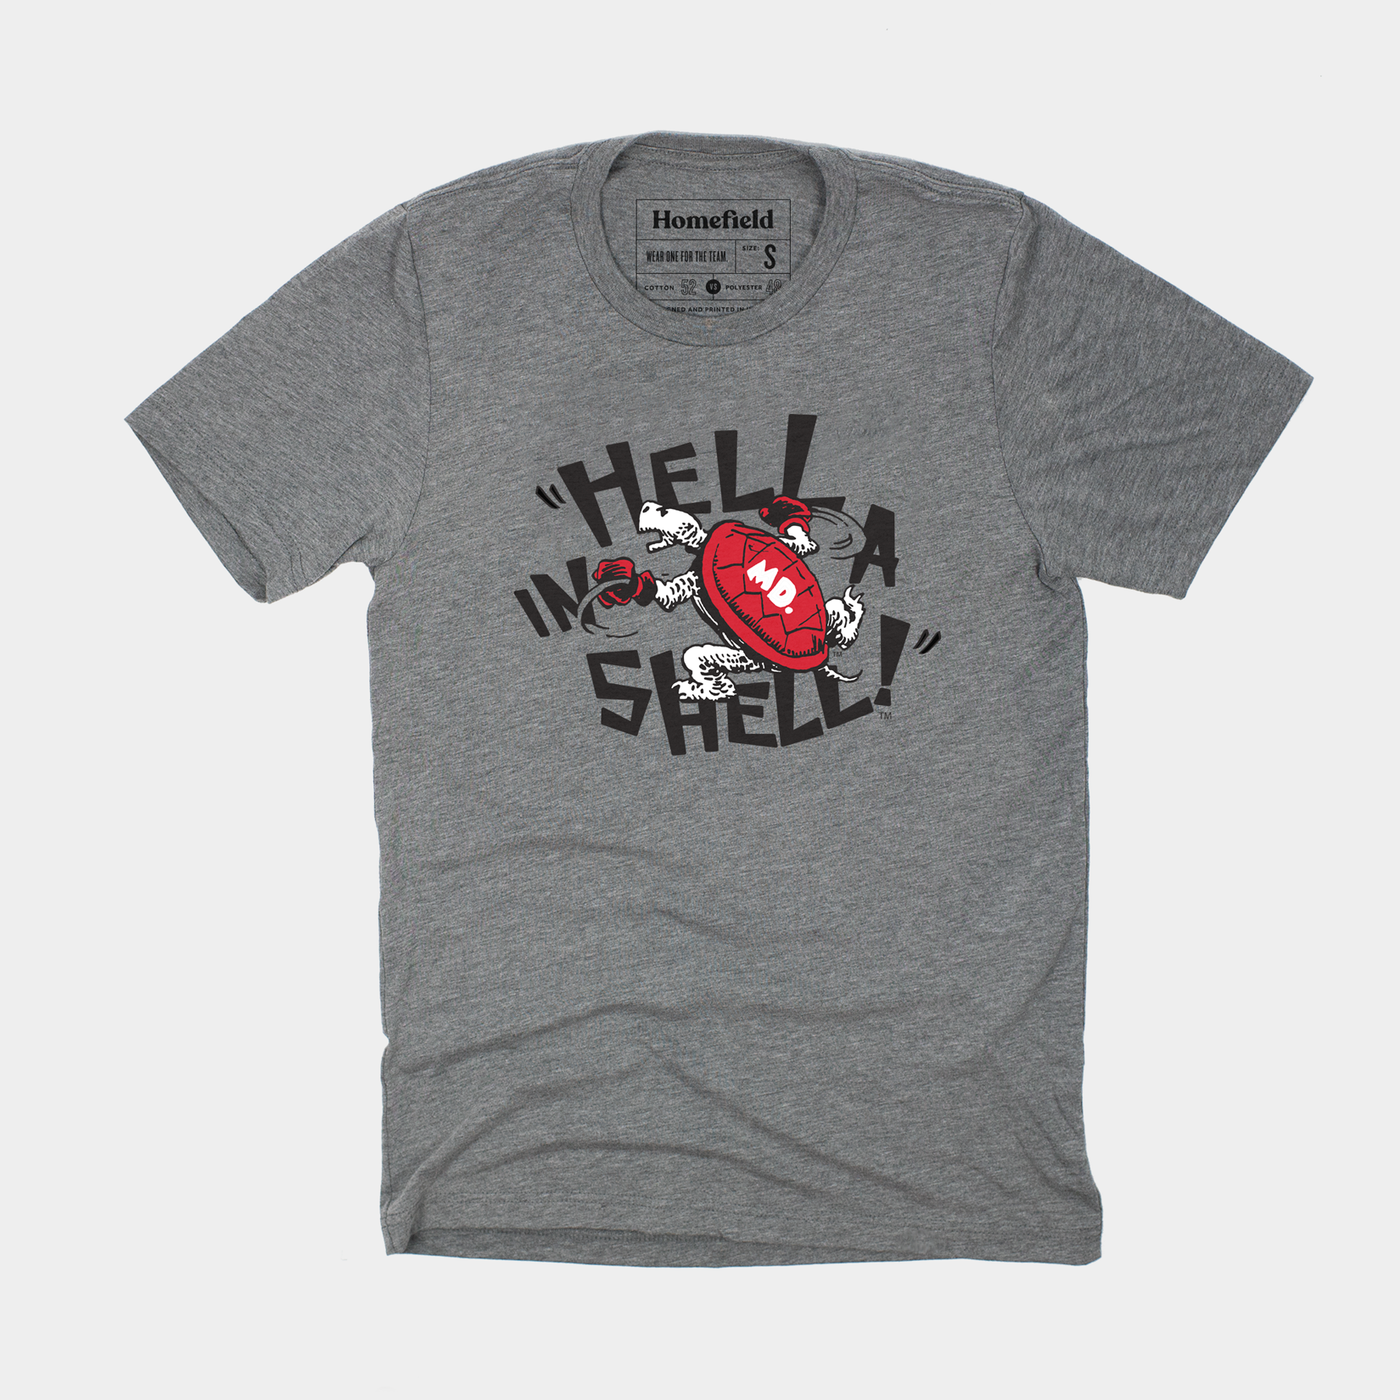 Maryland "Hell in a Shell" Tee